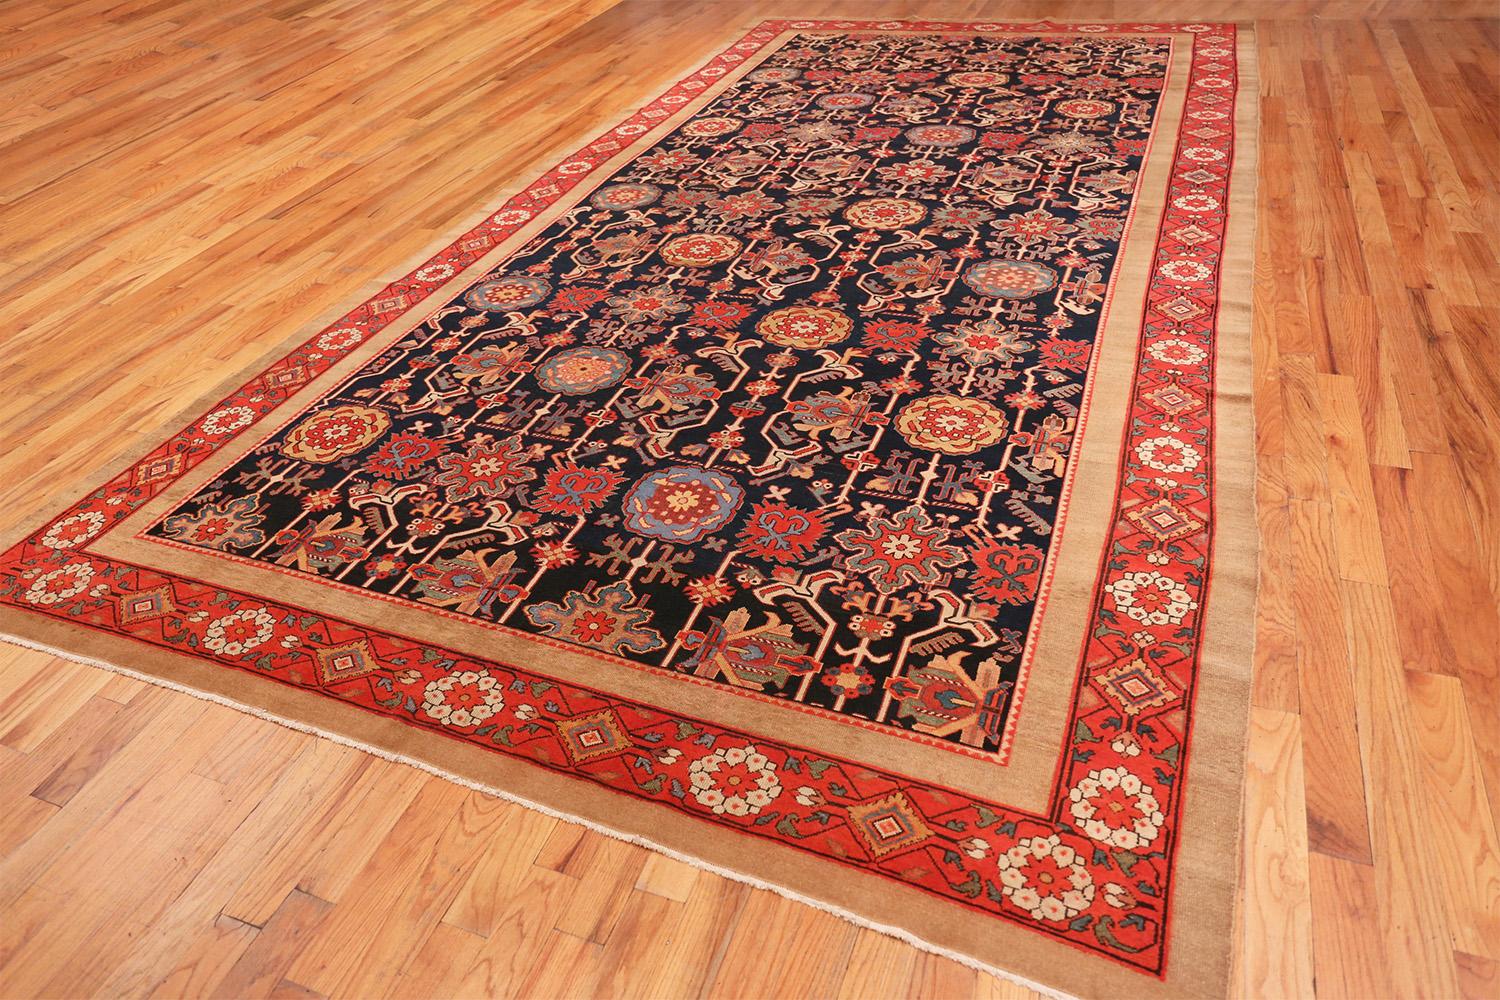 Beautiful Antique Northwest Persian Rug, Country of Origin / Rug Type: Persian Rug, Circa Date: 1900. Size: 8 ft 8 in x 16 ft 10 in (2.64 m x 5.13 m)

This majestic antique Northwest Persian carpet was woven around the turn of the 20th century. It